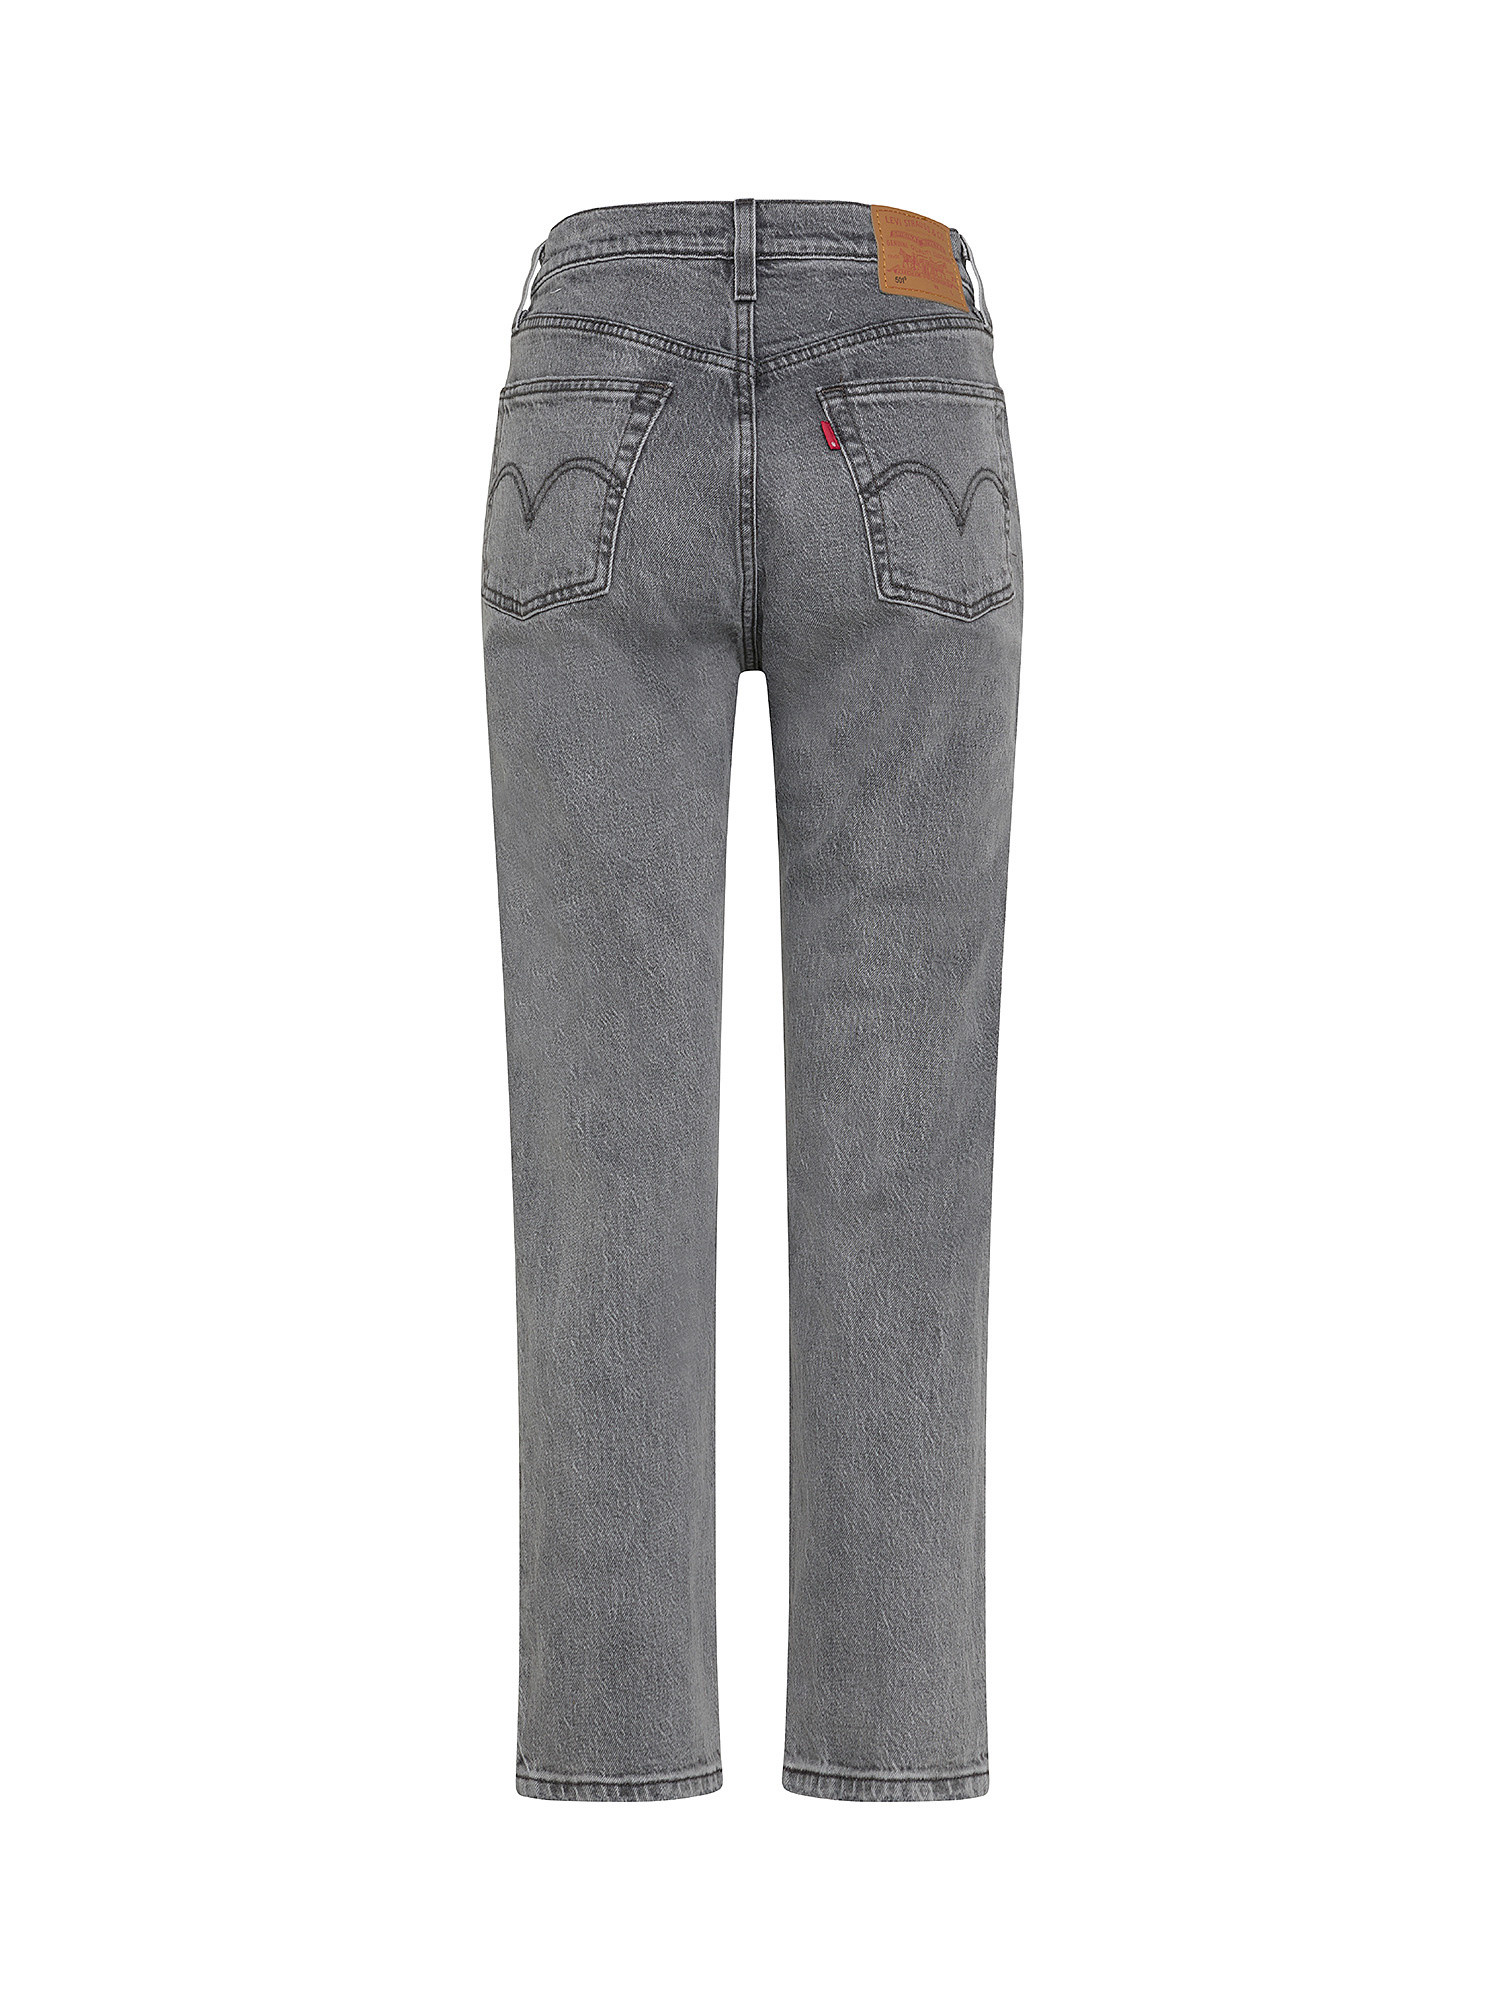 Levi's - 501® cropped jeans, Grey, large image number 1